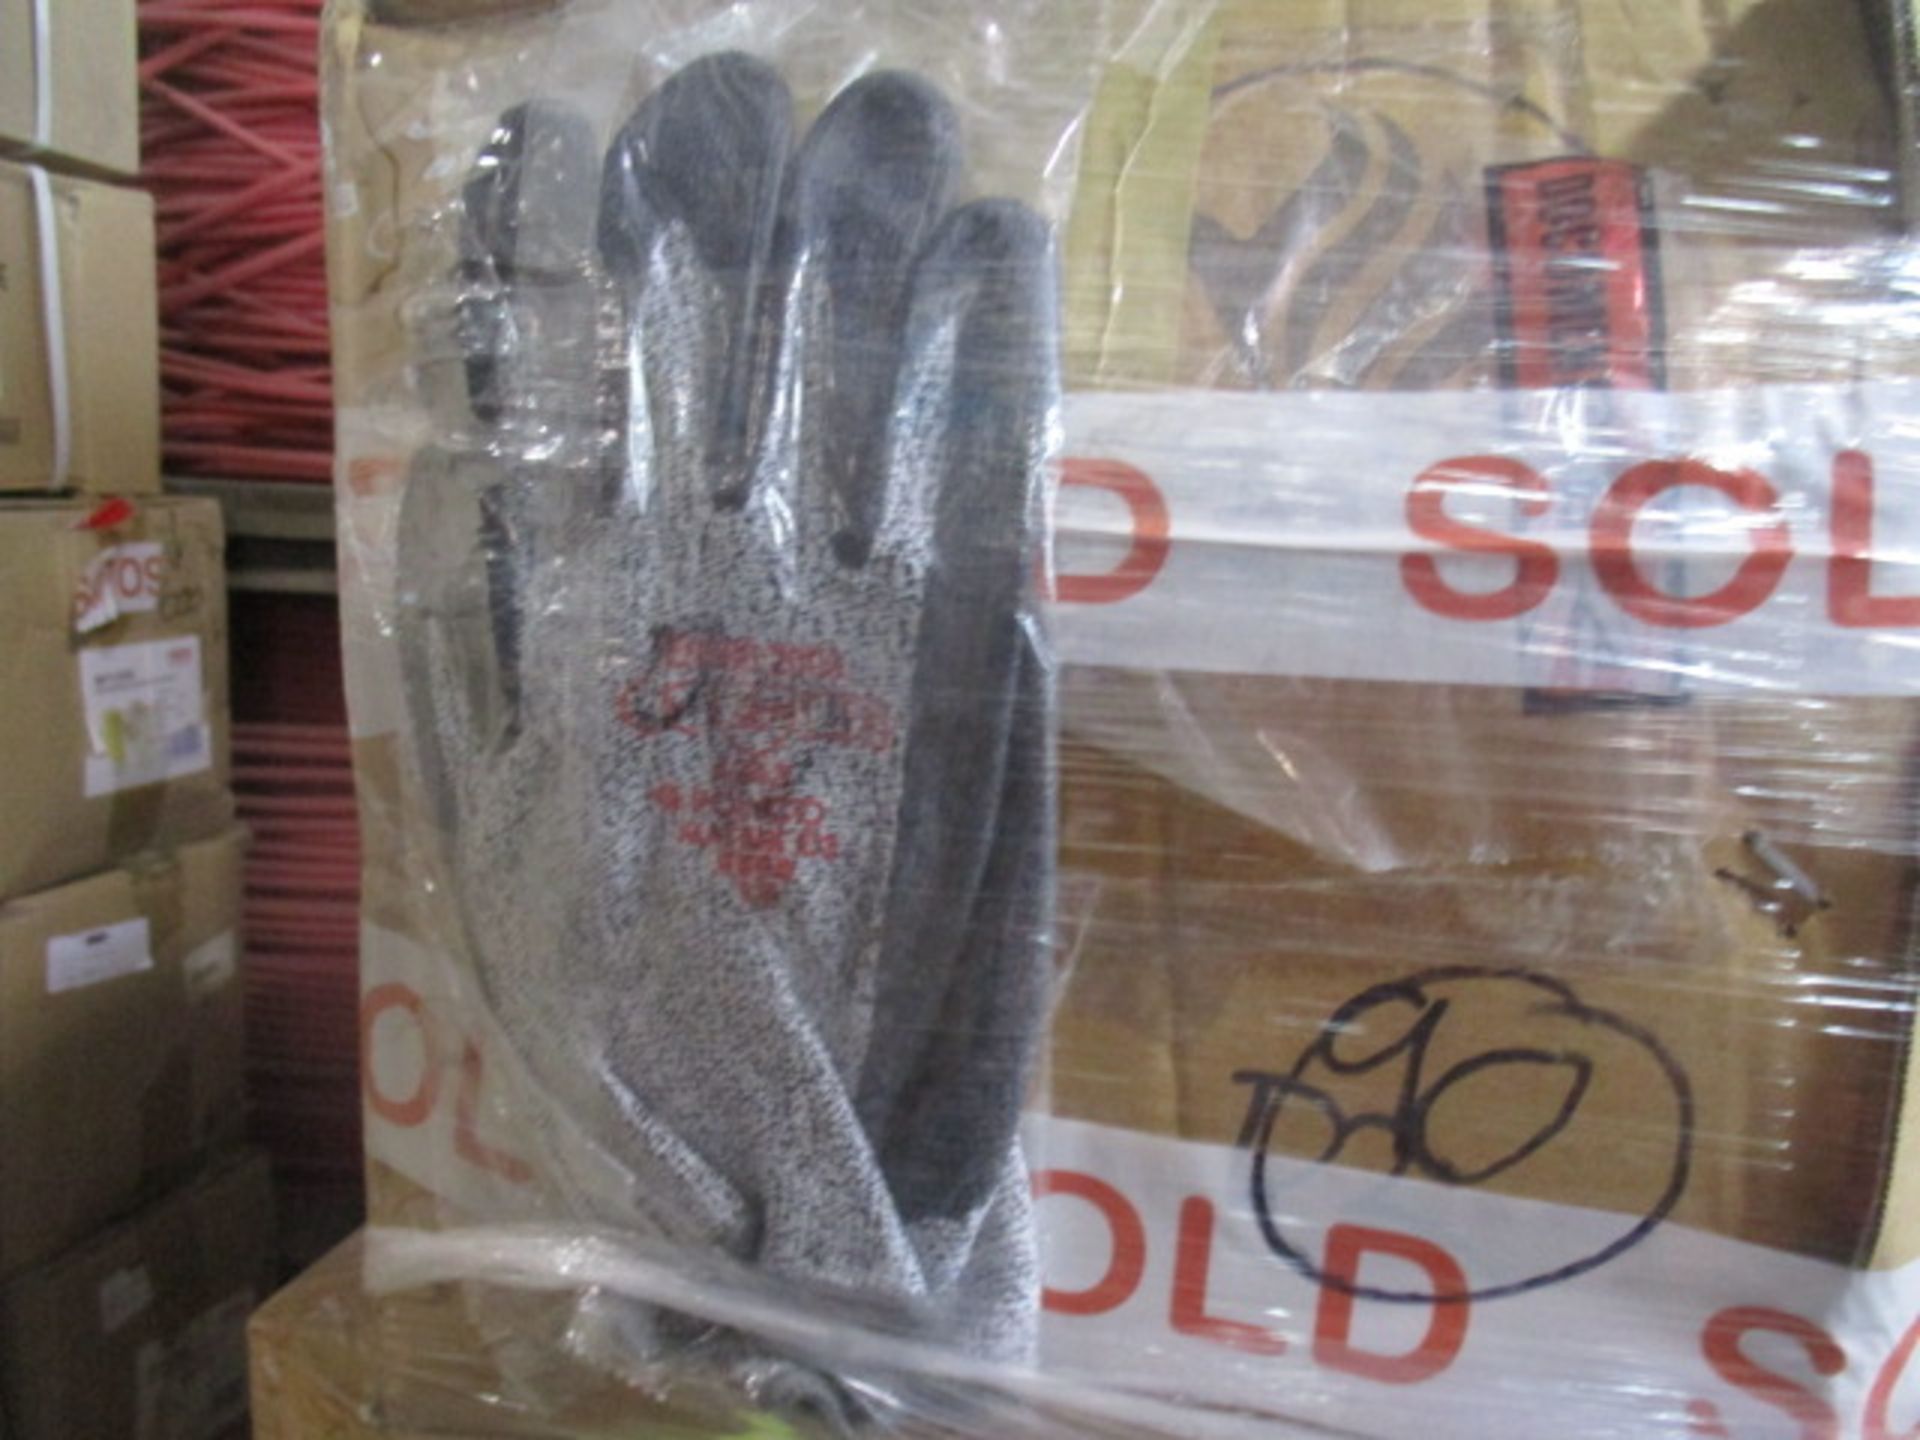 Appx 90 pairs of brand new workwear gloves